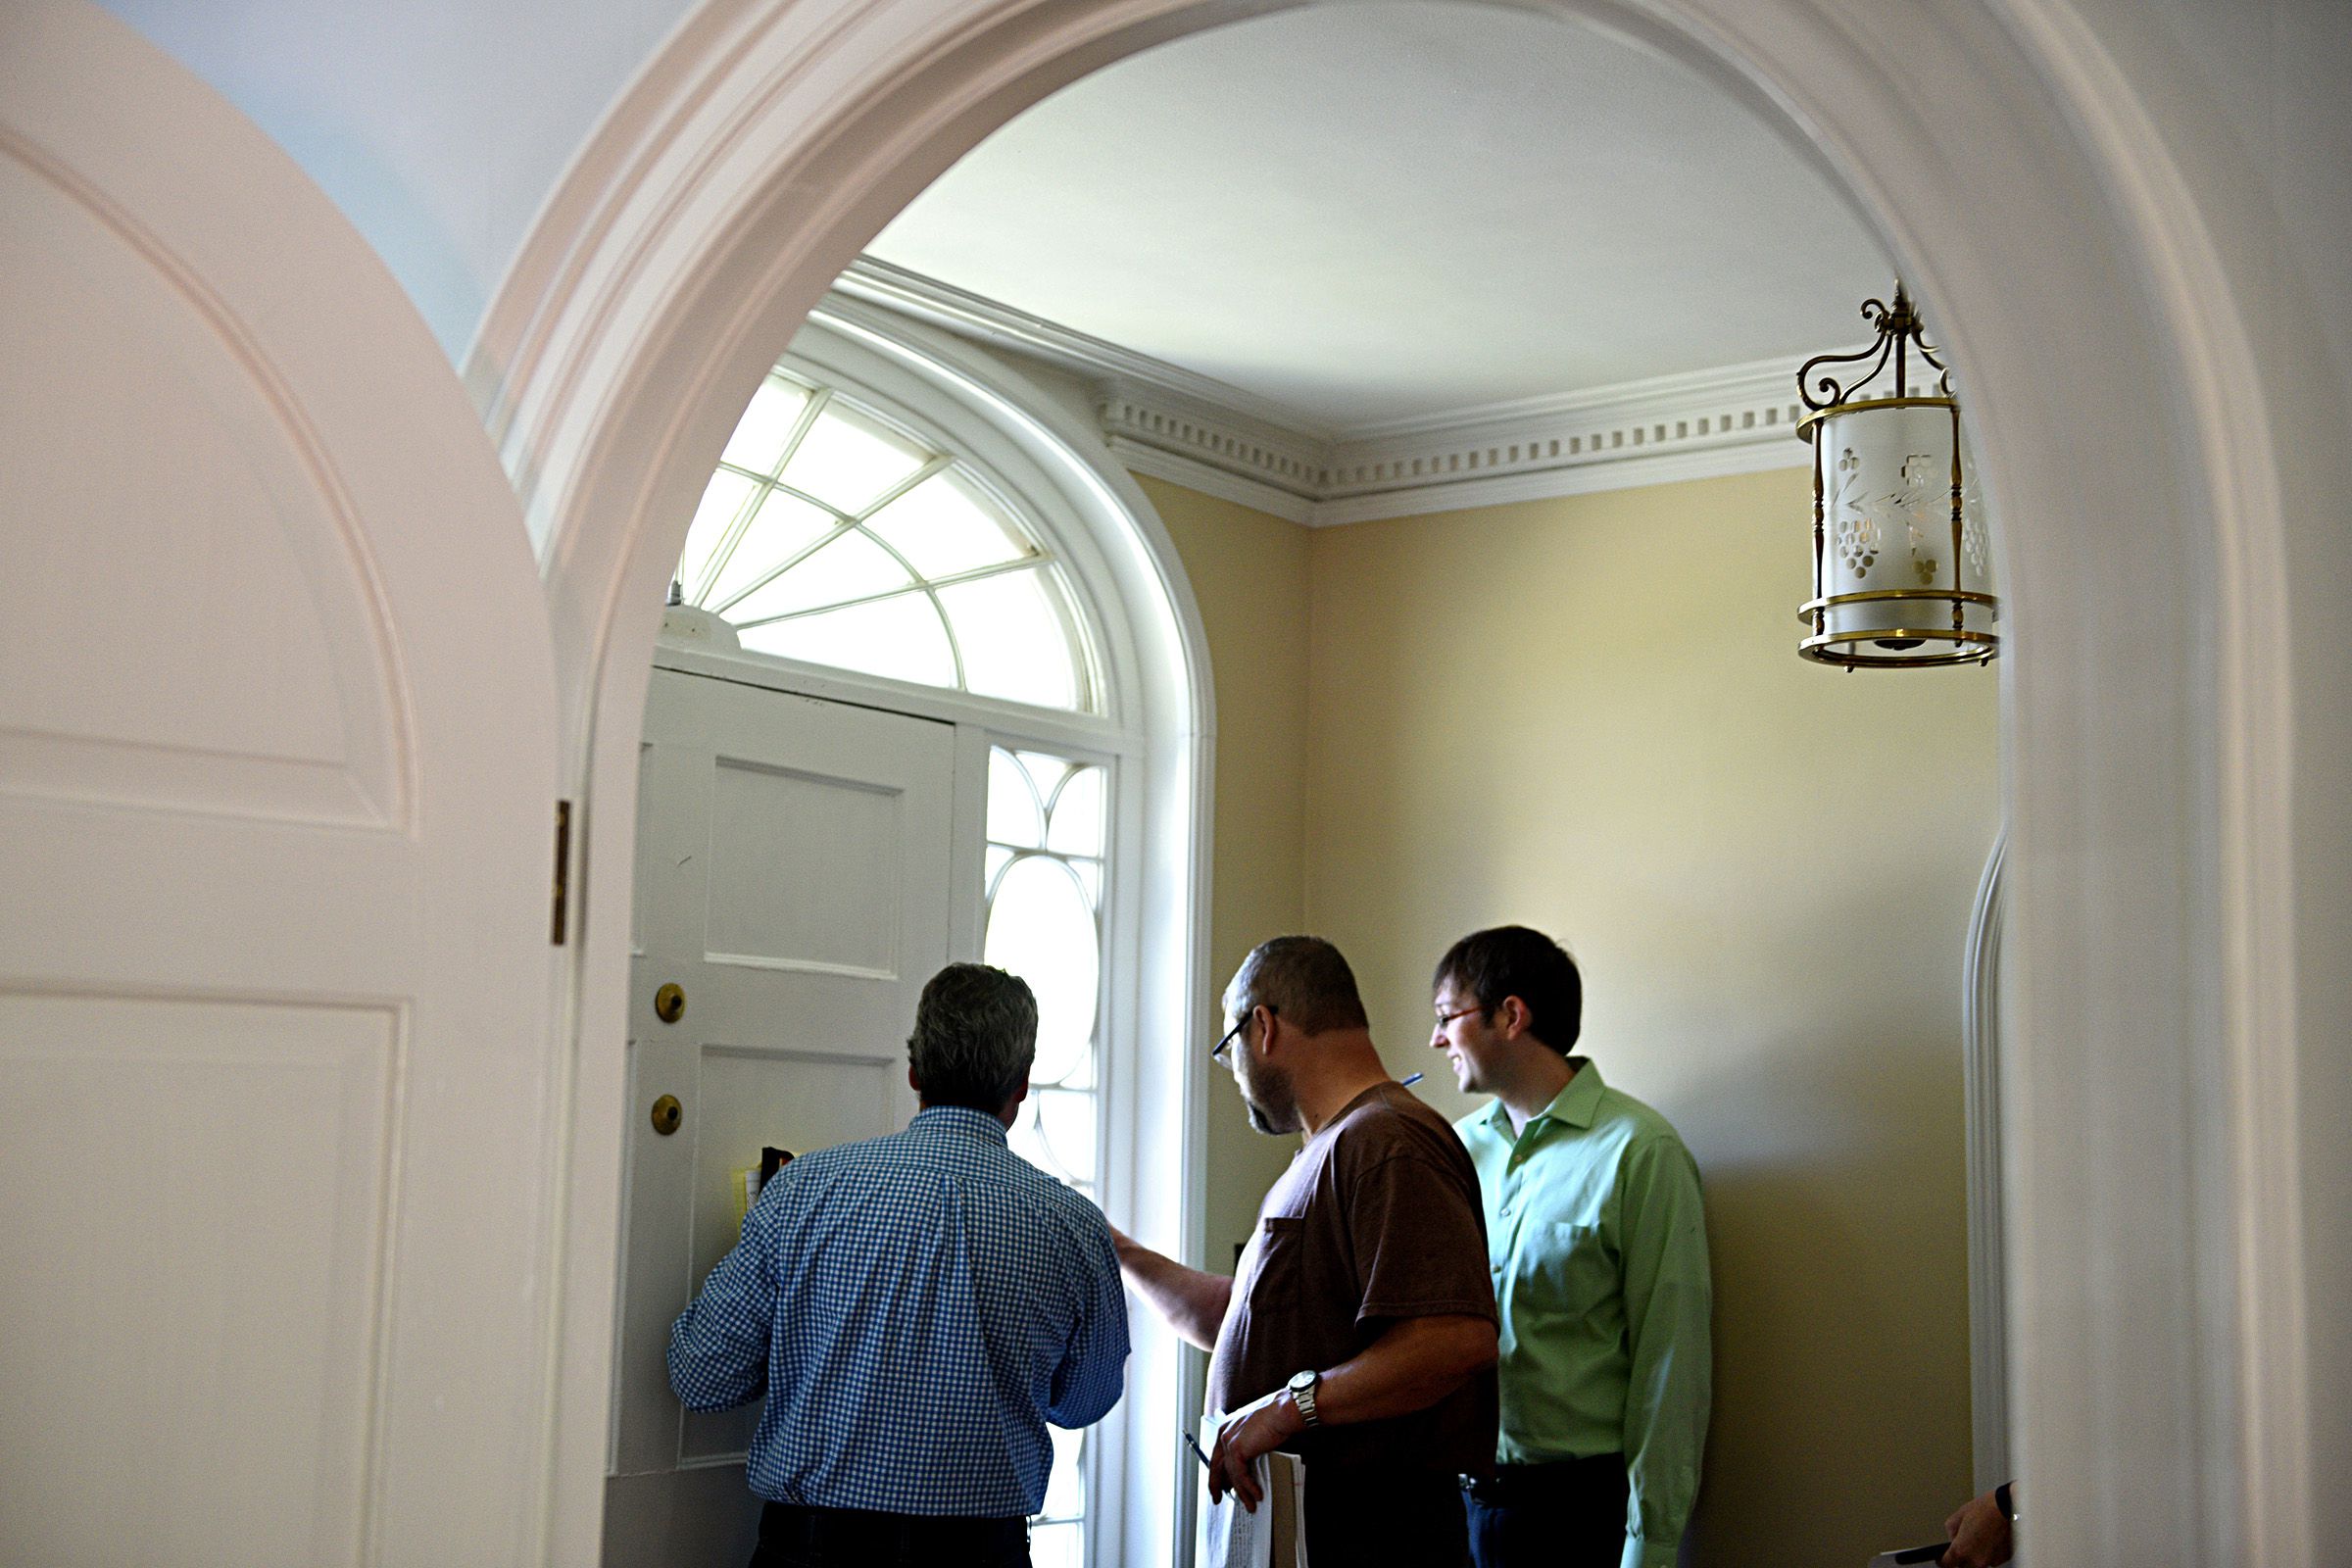 Todd Thompson vice president and project manger of Trumbull-Nelson, left, Dave Stanley superintendent at Trumbull-Nelson and Ben Van Vliet, executive director at the Upper Valley Music Center look at a crack in the glass surrounding a door in Lebanon, N.H. on Sept. 11, 2017.  (Valley News - Jennifer Hauck) Copyright Valley News. May not be reprinted or used online without permission. Send requests to permission@vnews.com.